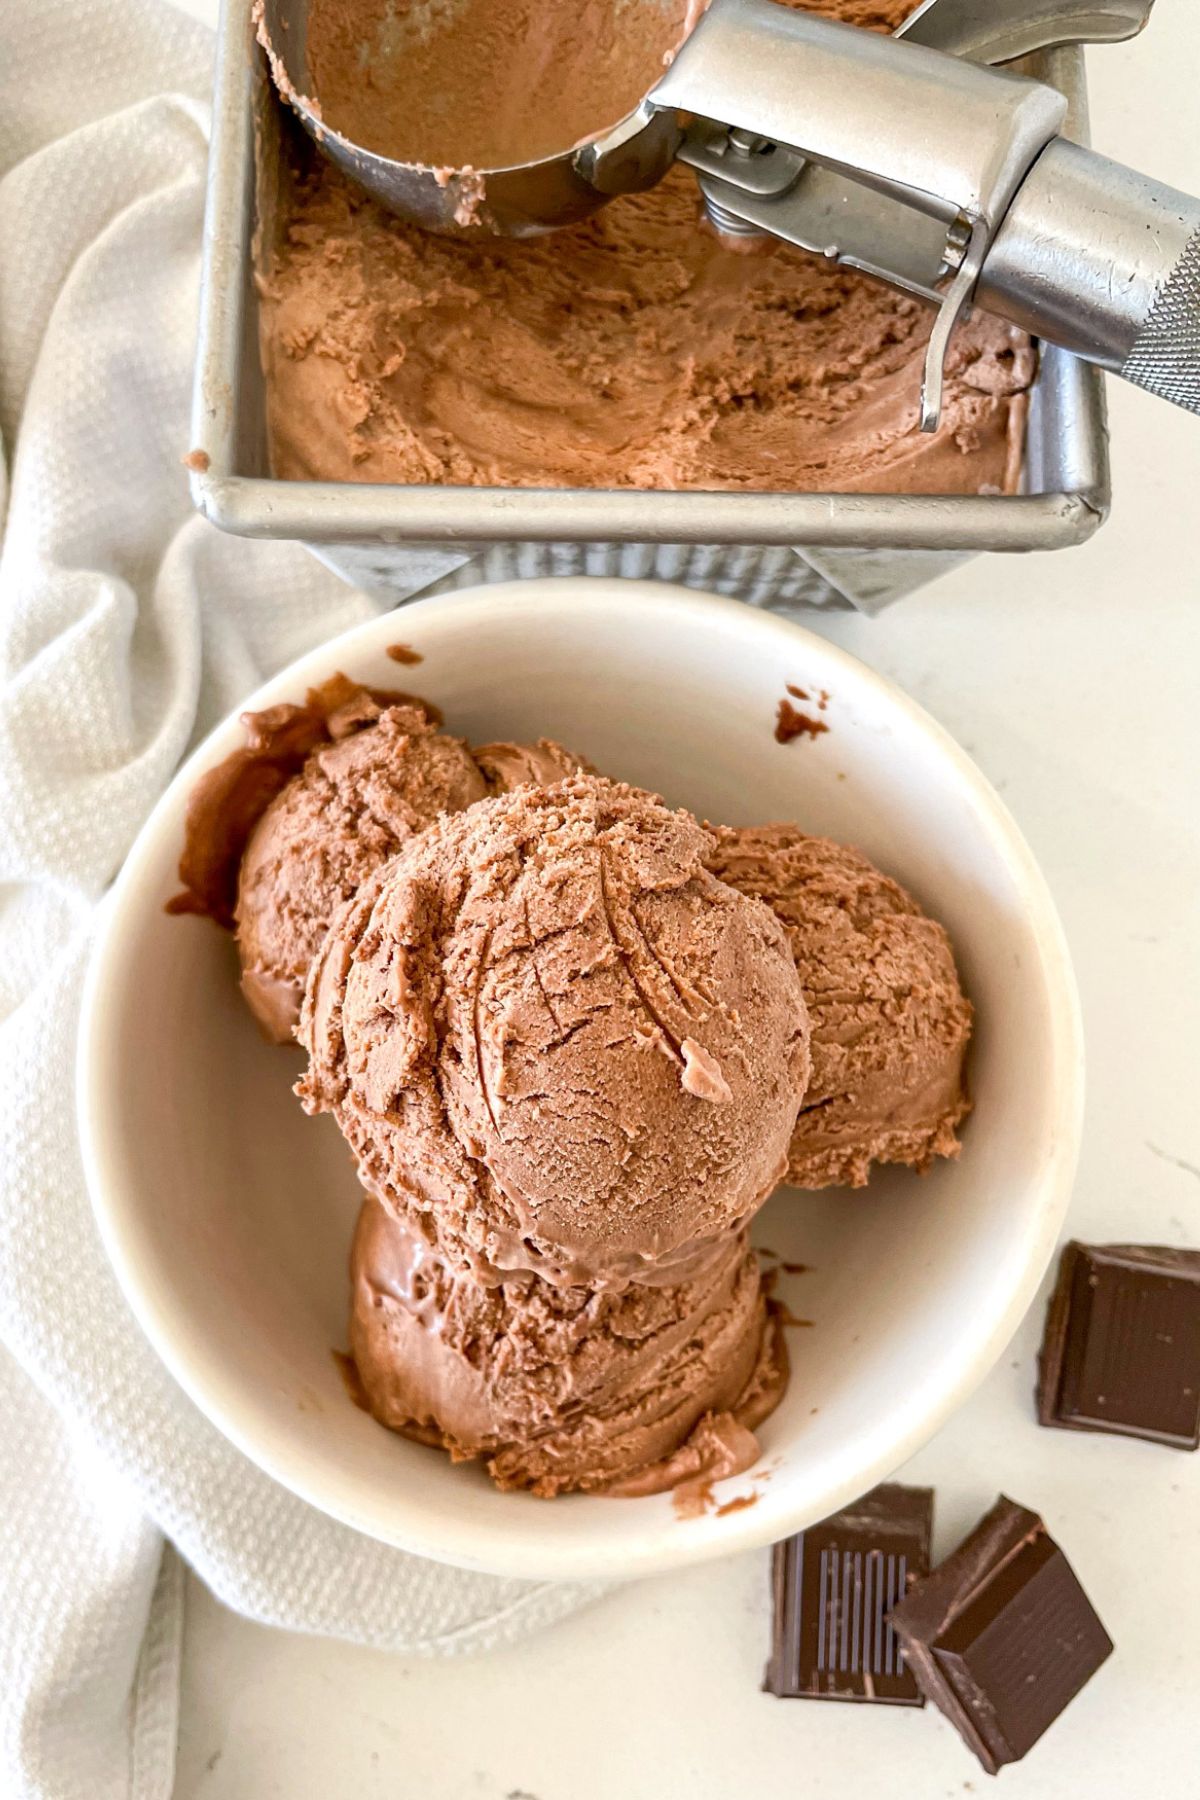 chocolate ice cream scoops in white bowl above